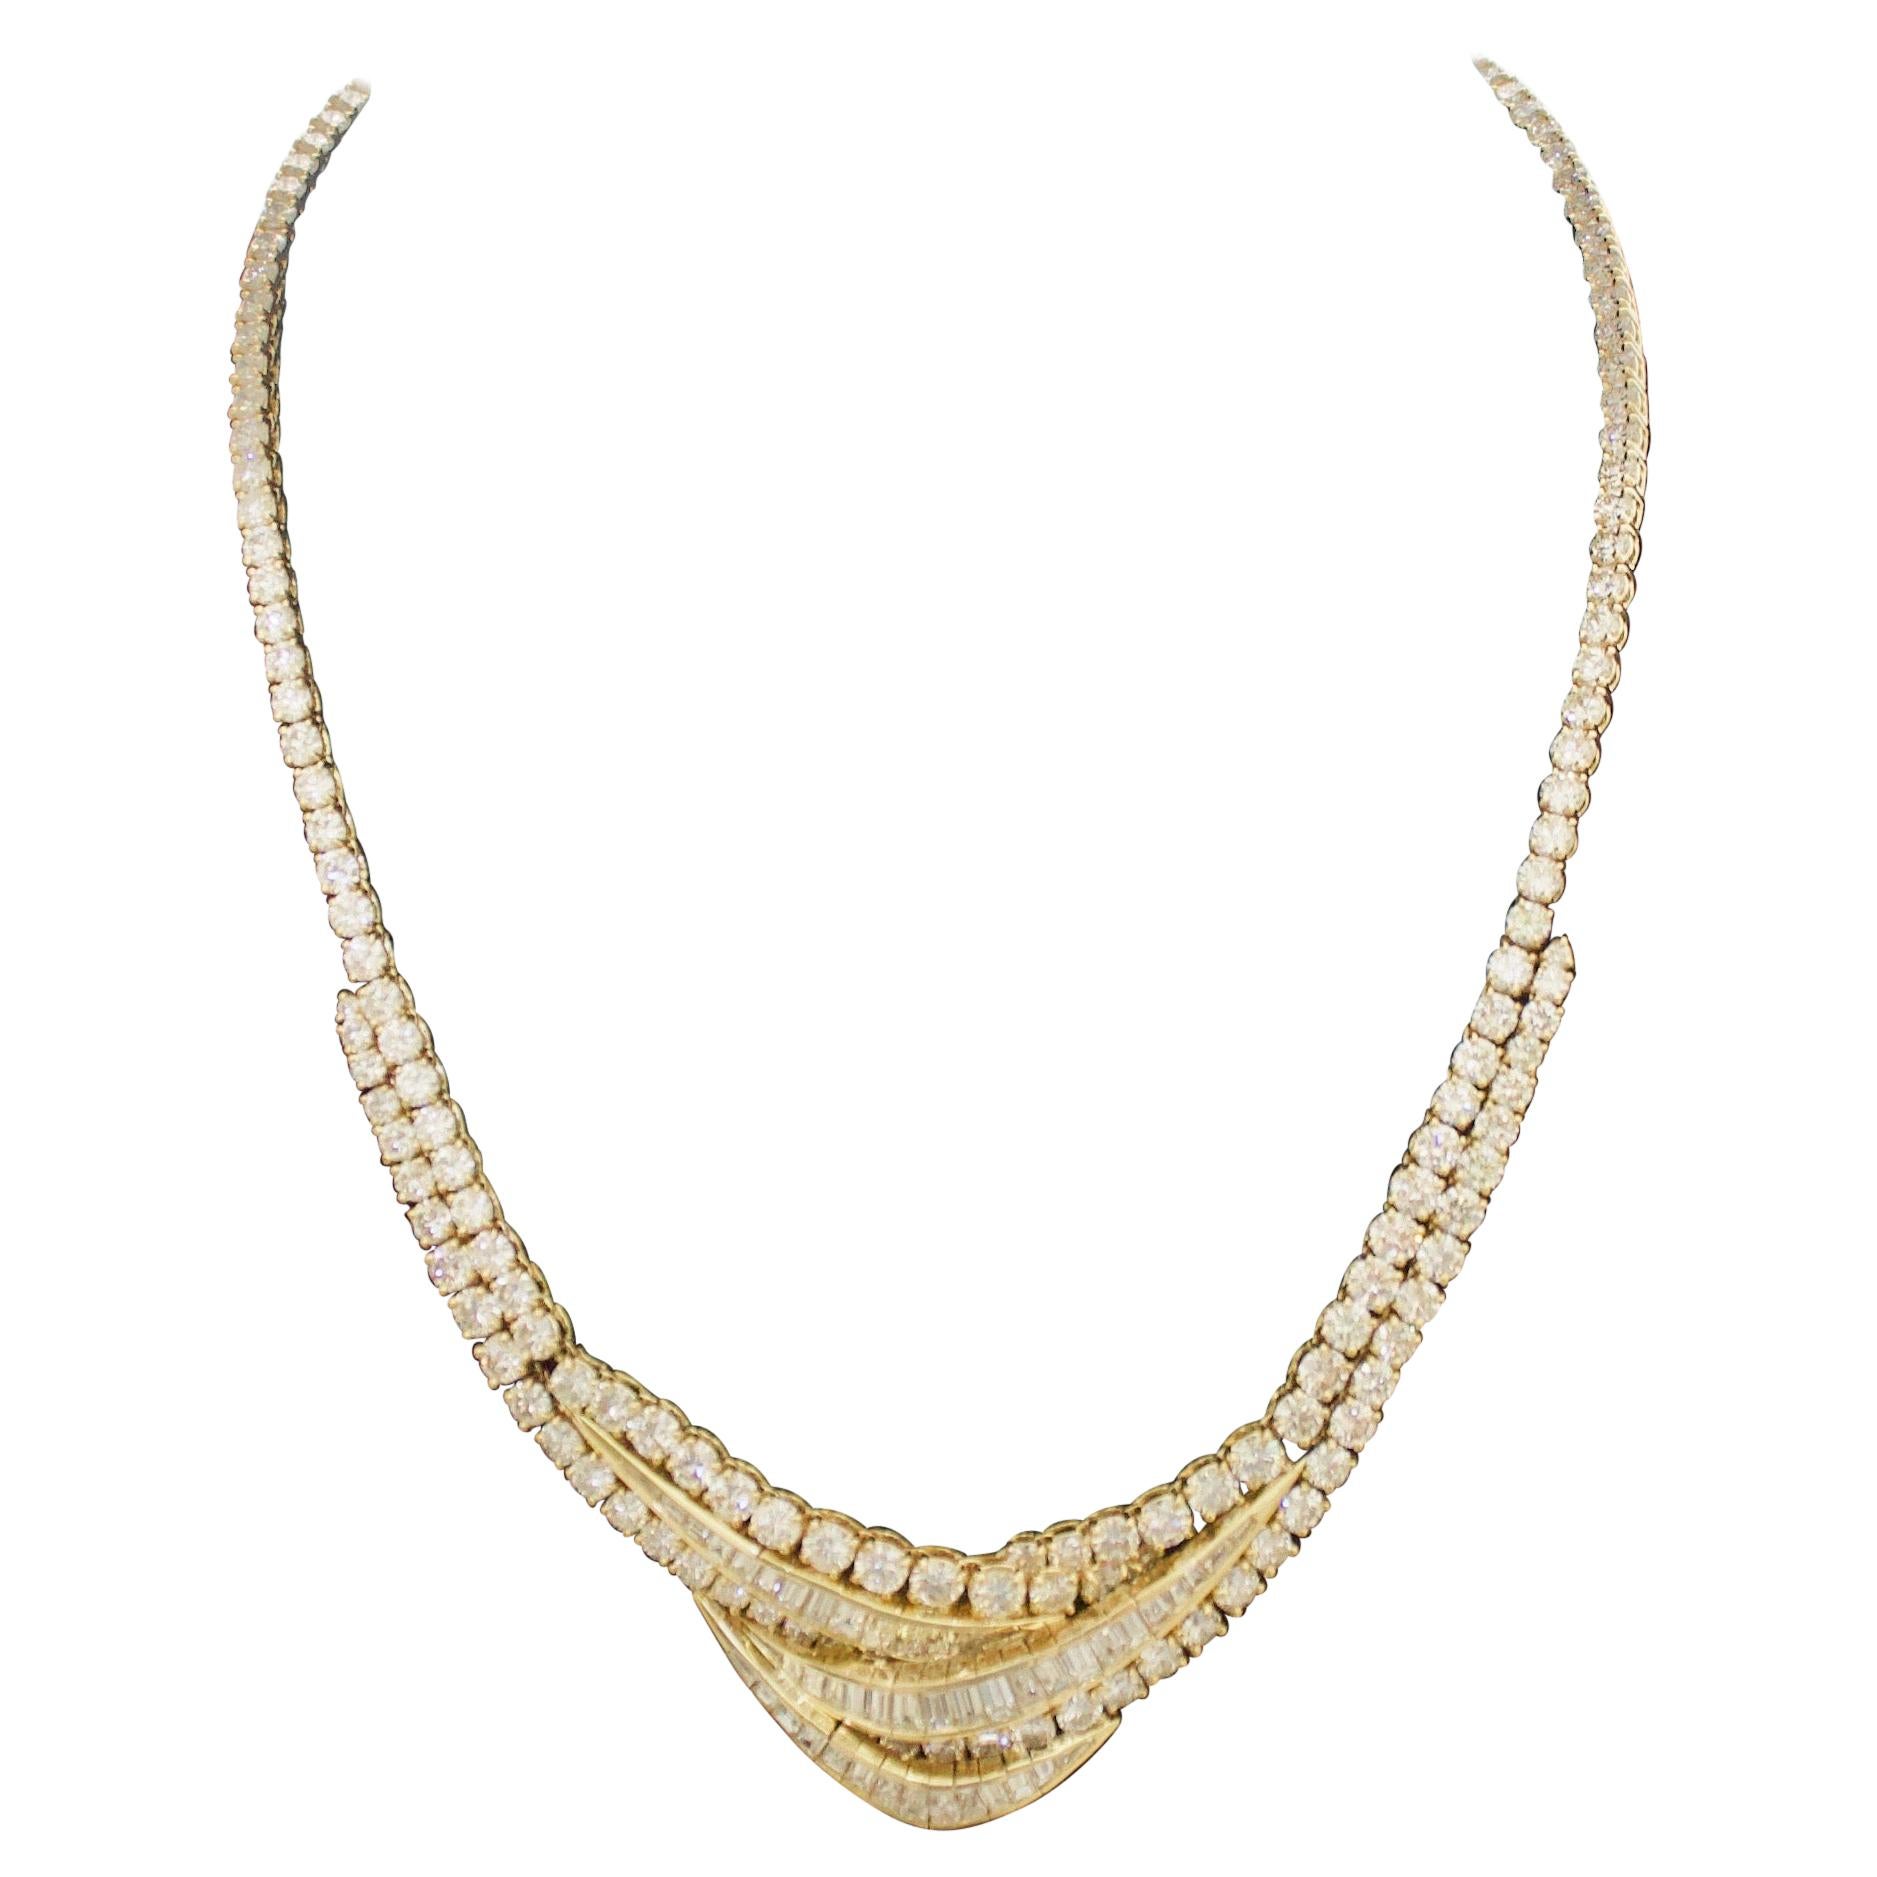 Important Diamond Necklace in 18k 28.41 Carats Total Weight For Sale